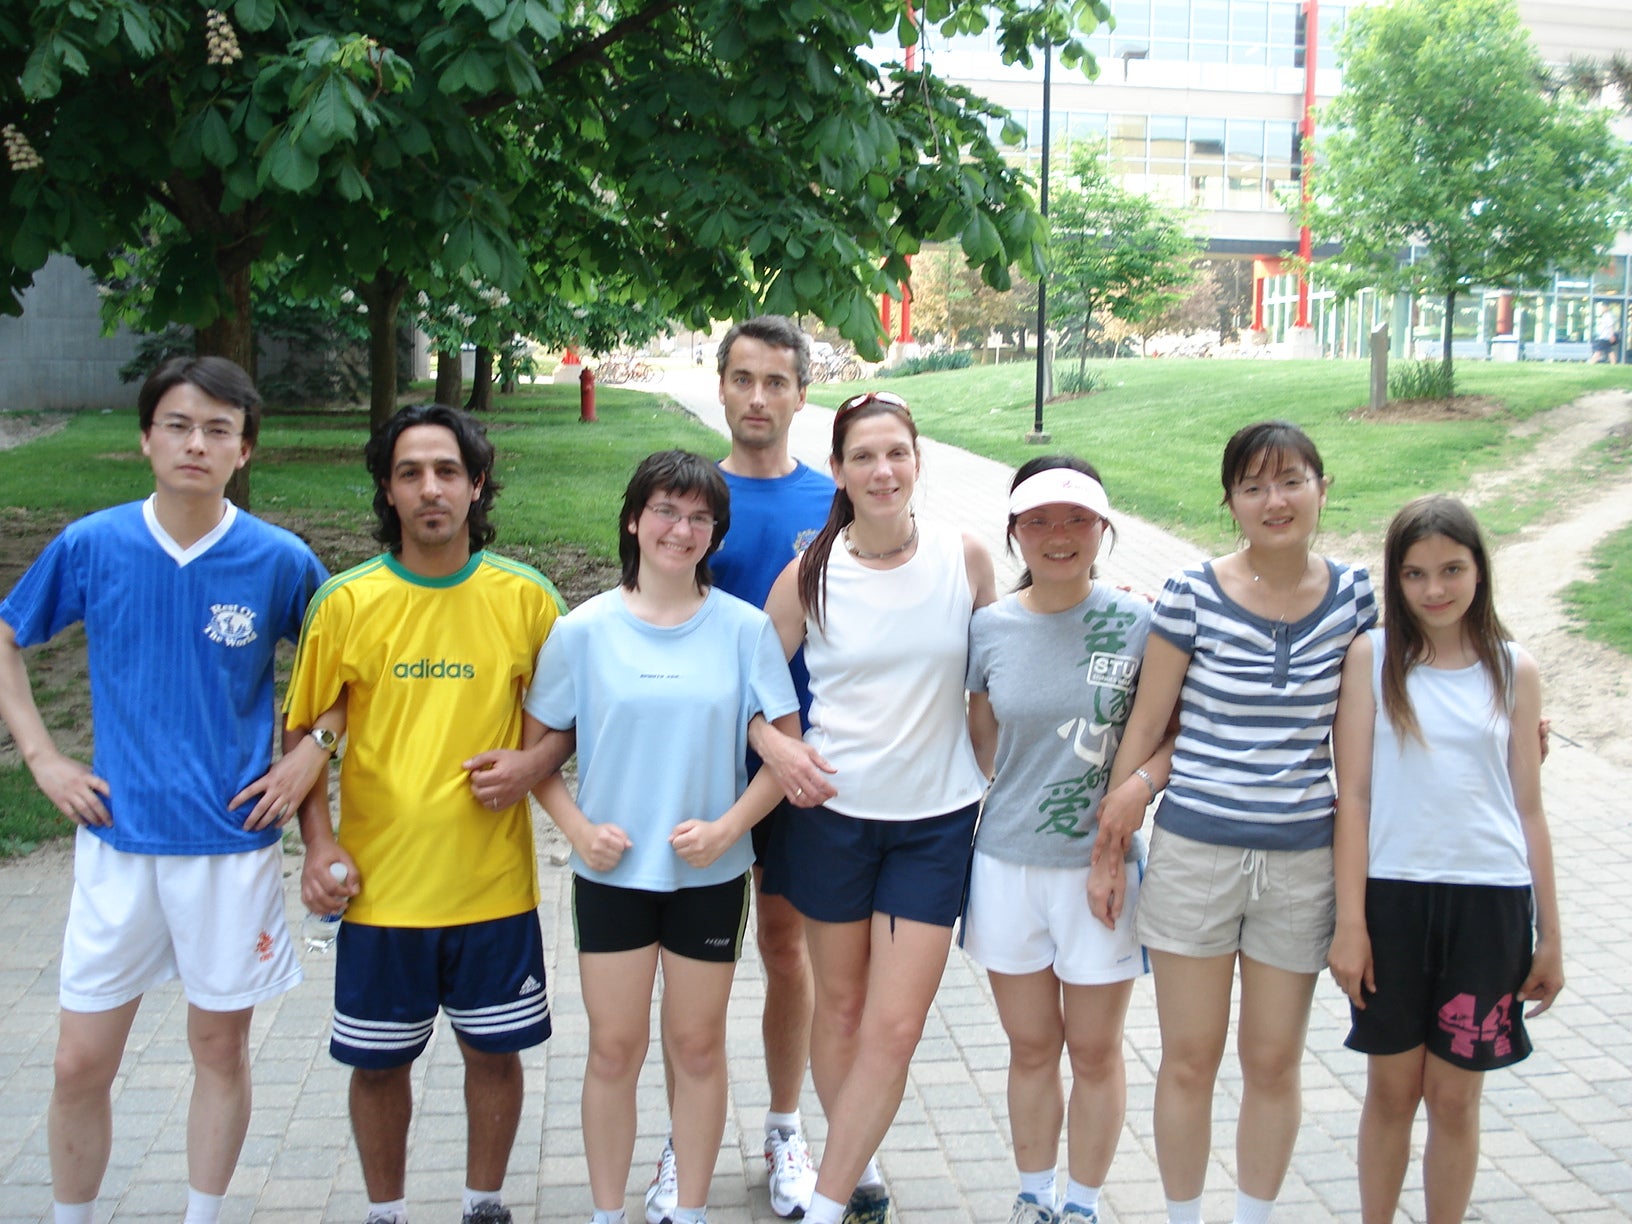 May 2007: Training for the corporate team competition of the Waterloo Classic 5 K race. From left to right: Jackie, Jalil, Nat, Holger, Katja, Yanjie, Annie, Kim.